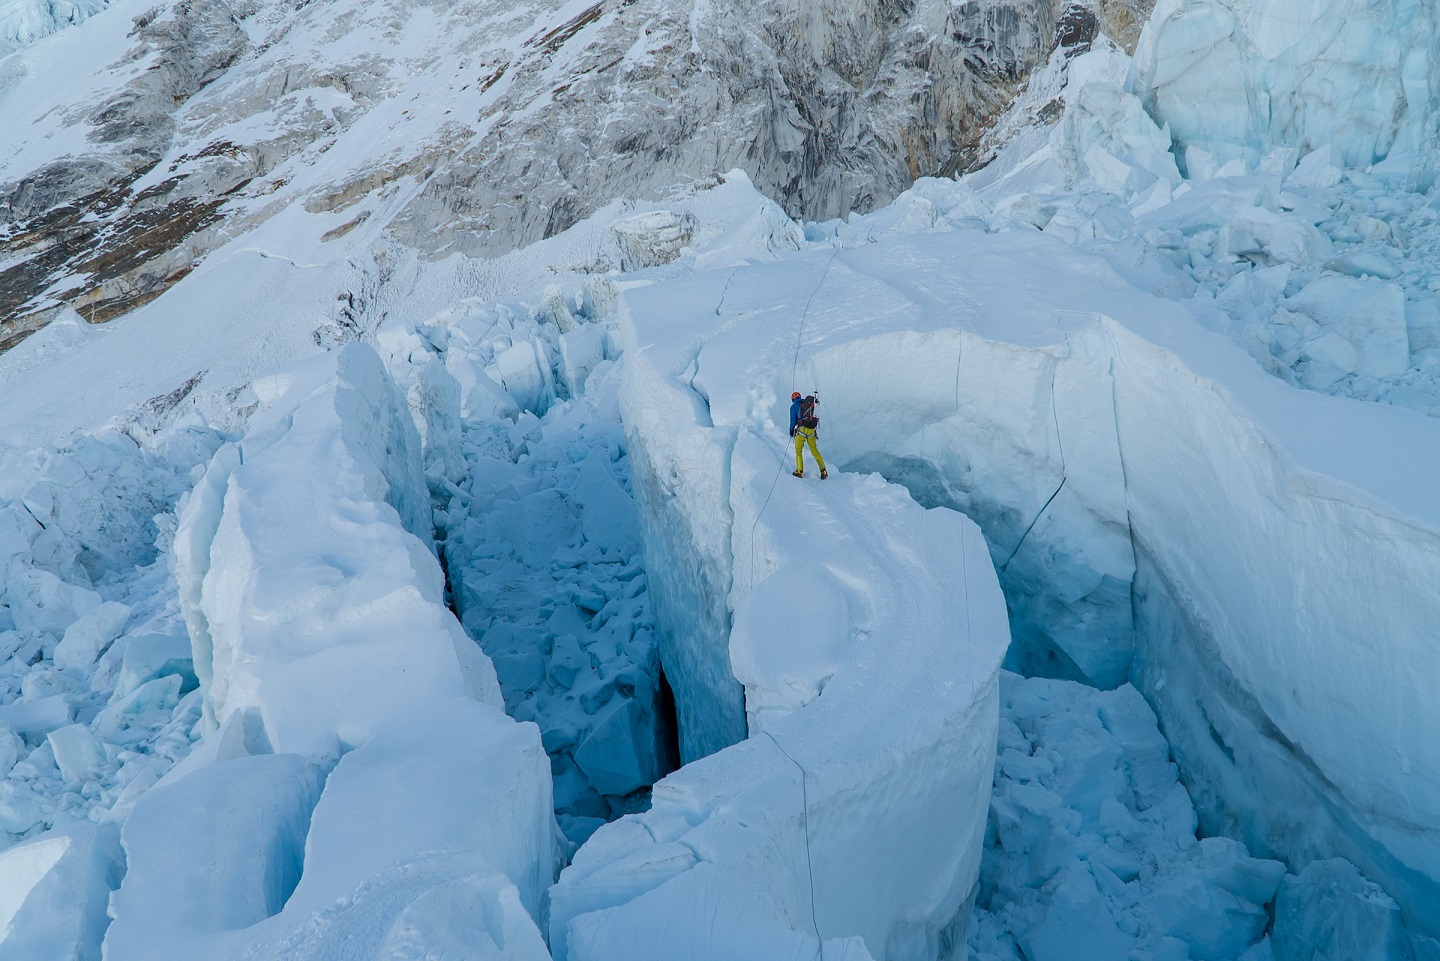 A top down view of a climber traversing narrow glaciated terrain. The climber is using ropes to safely navigate large crevasses.